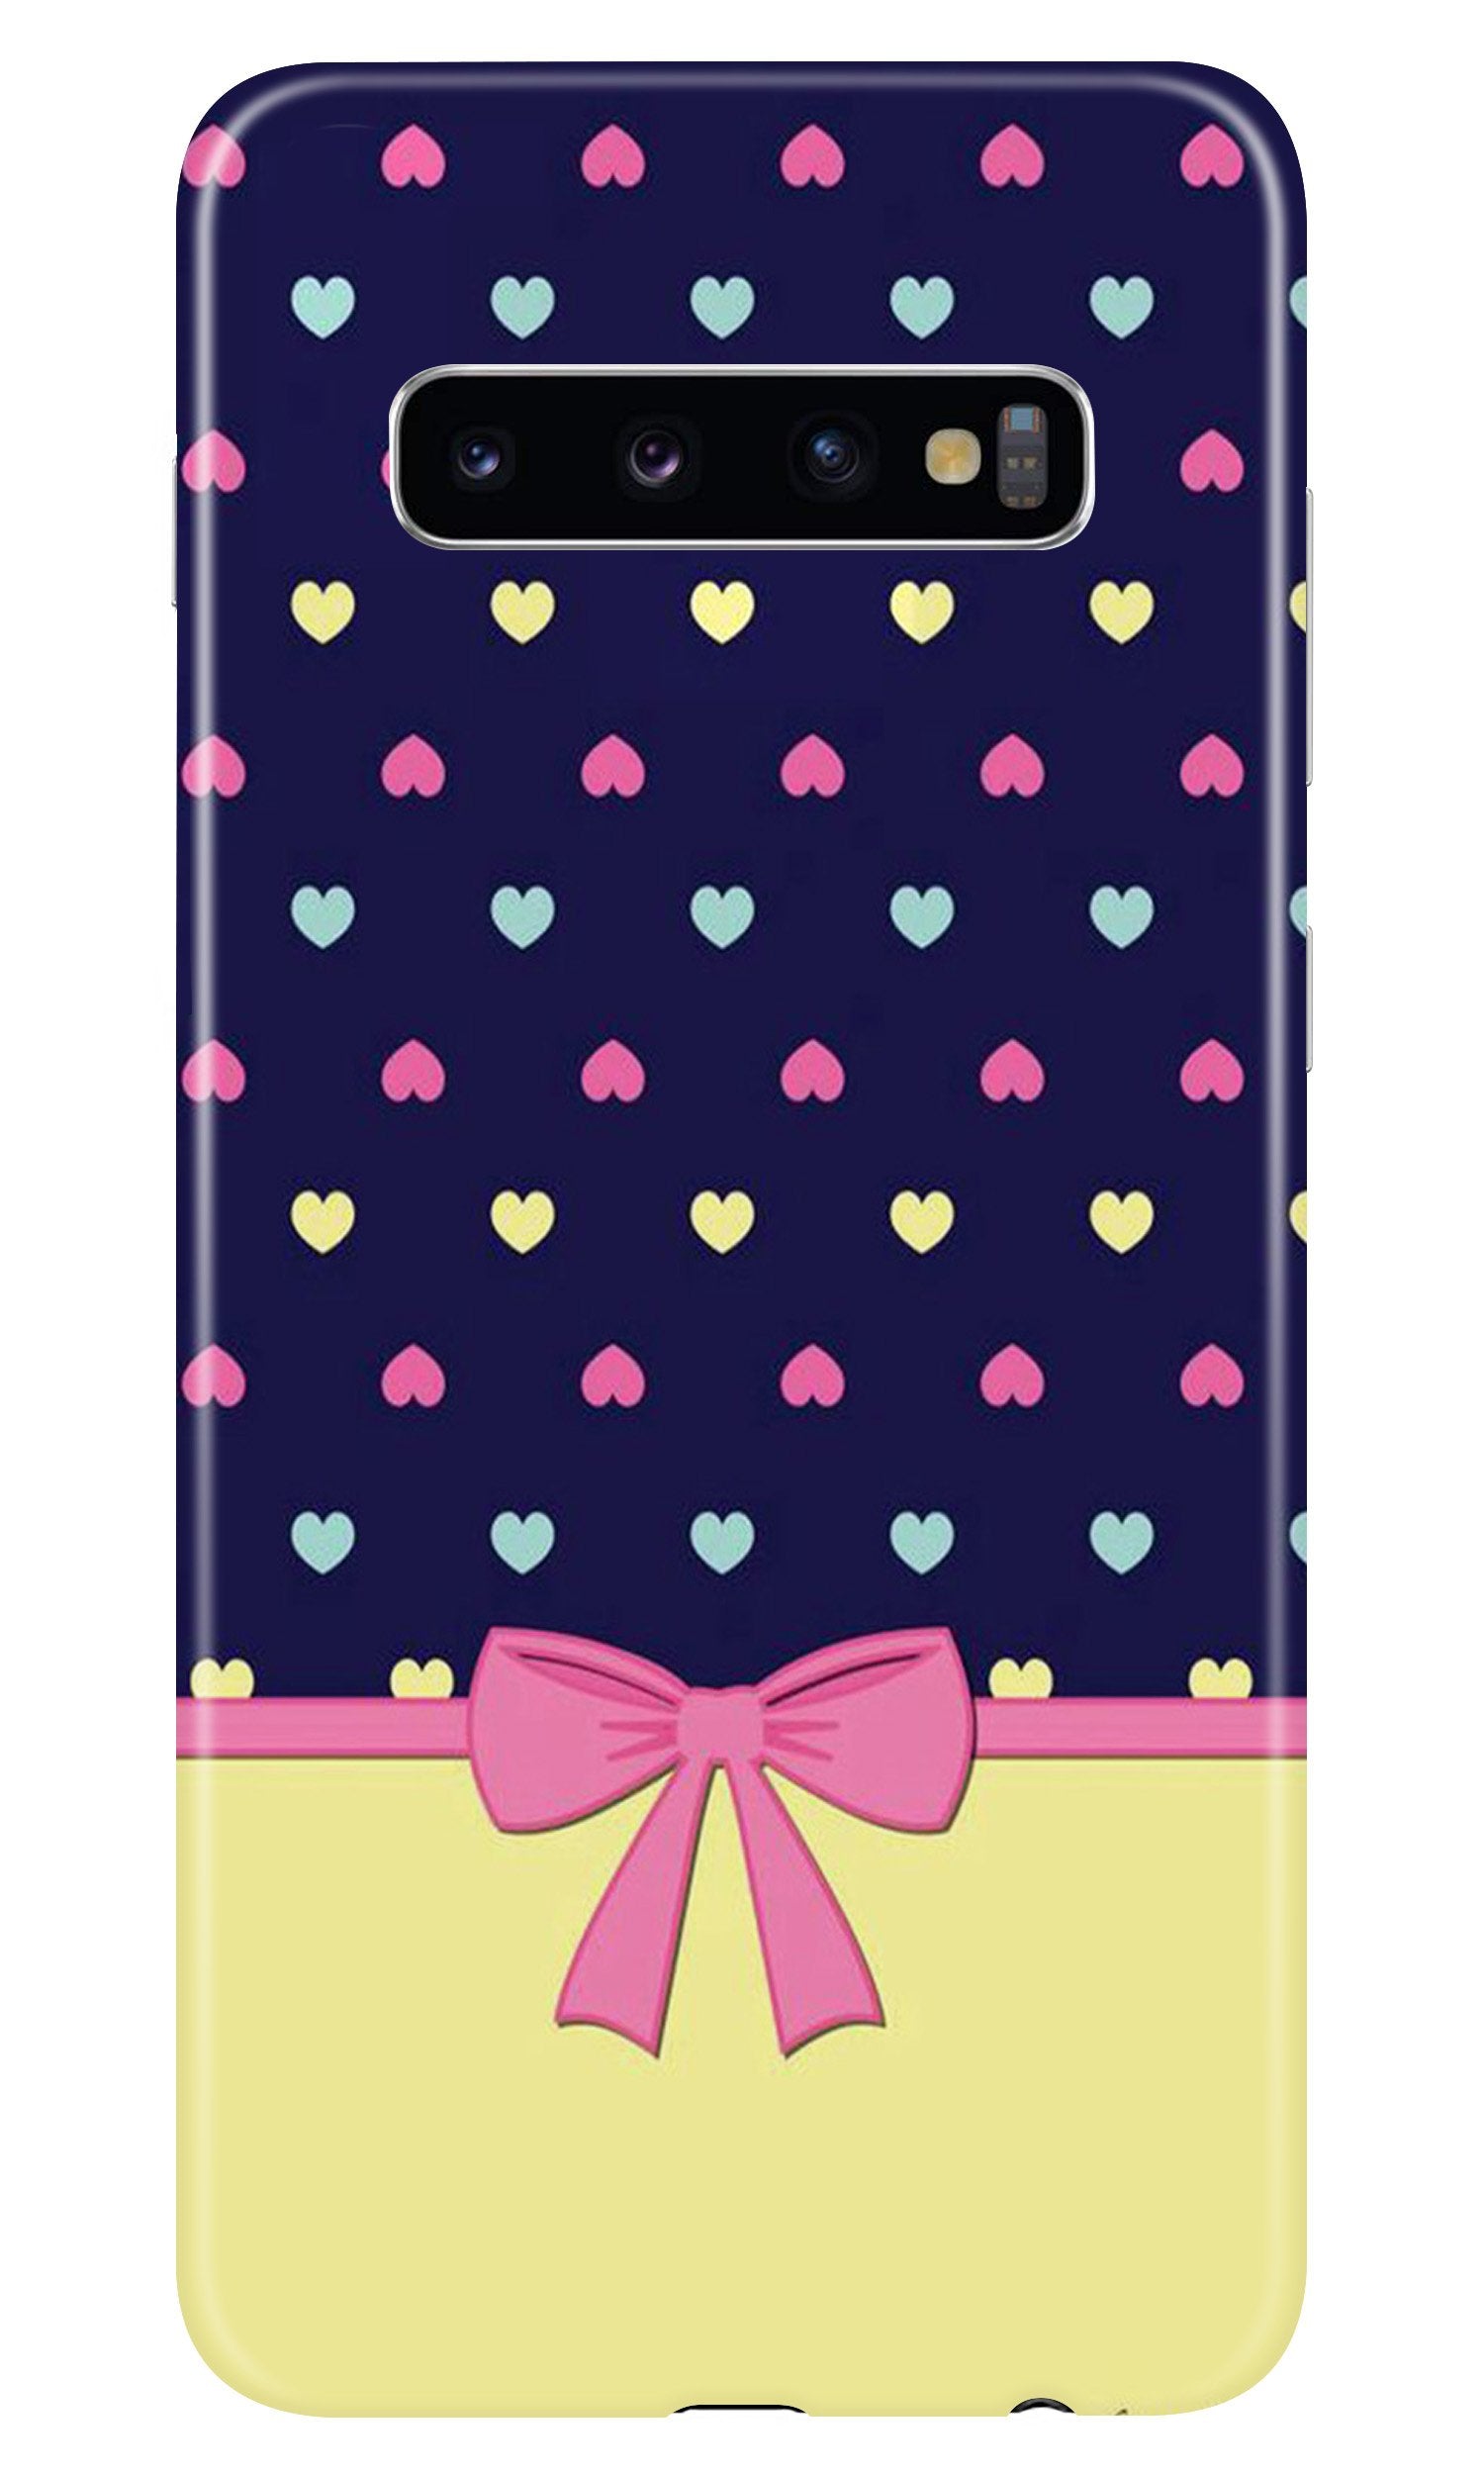 Gift Wrap5 Case for Samsung Galaxy S10 Plus